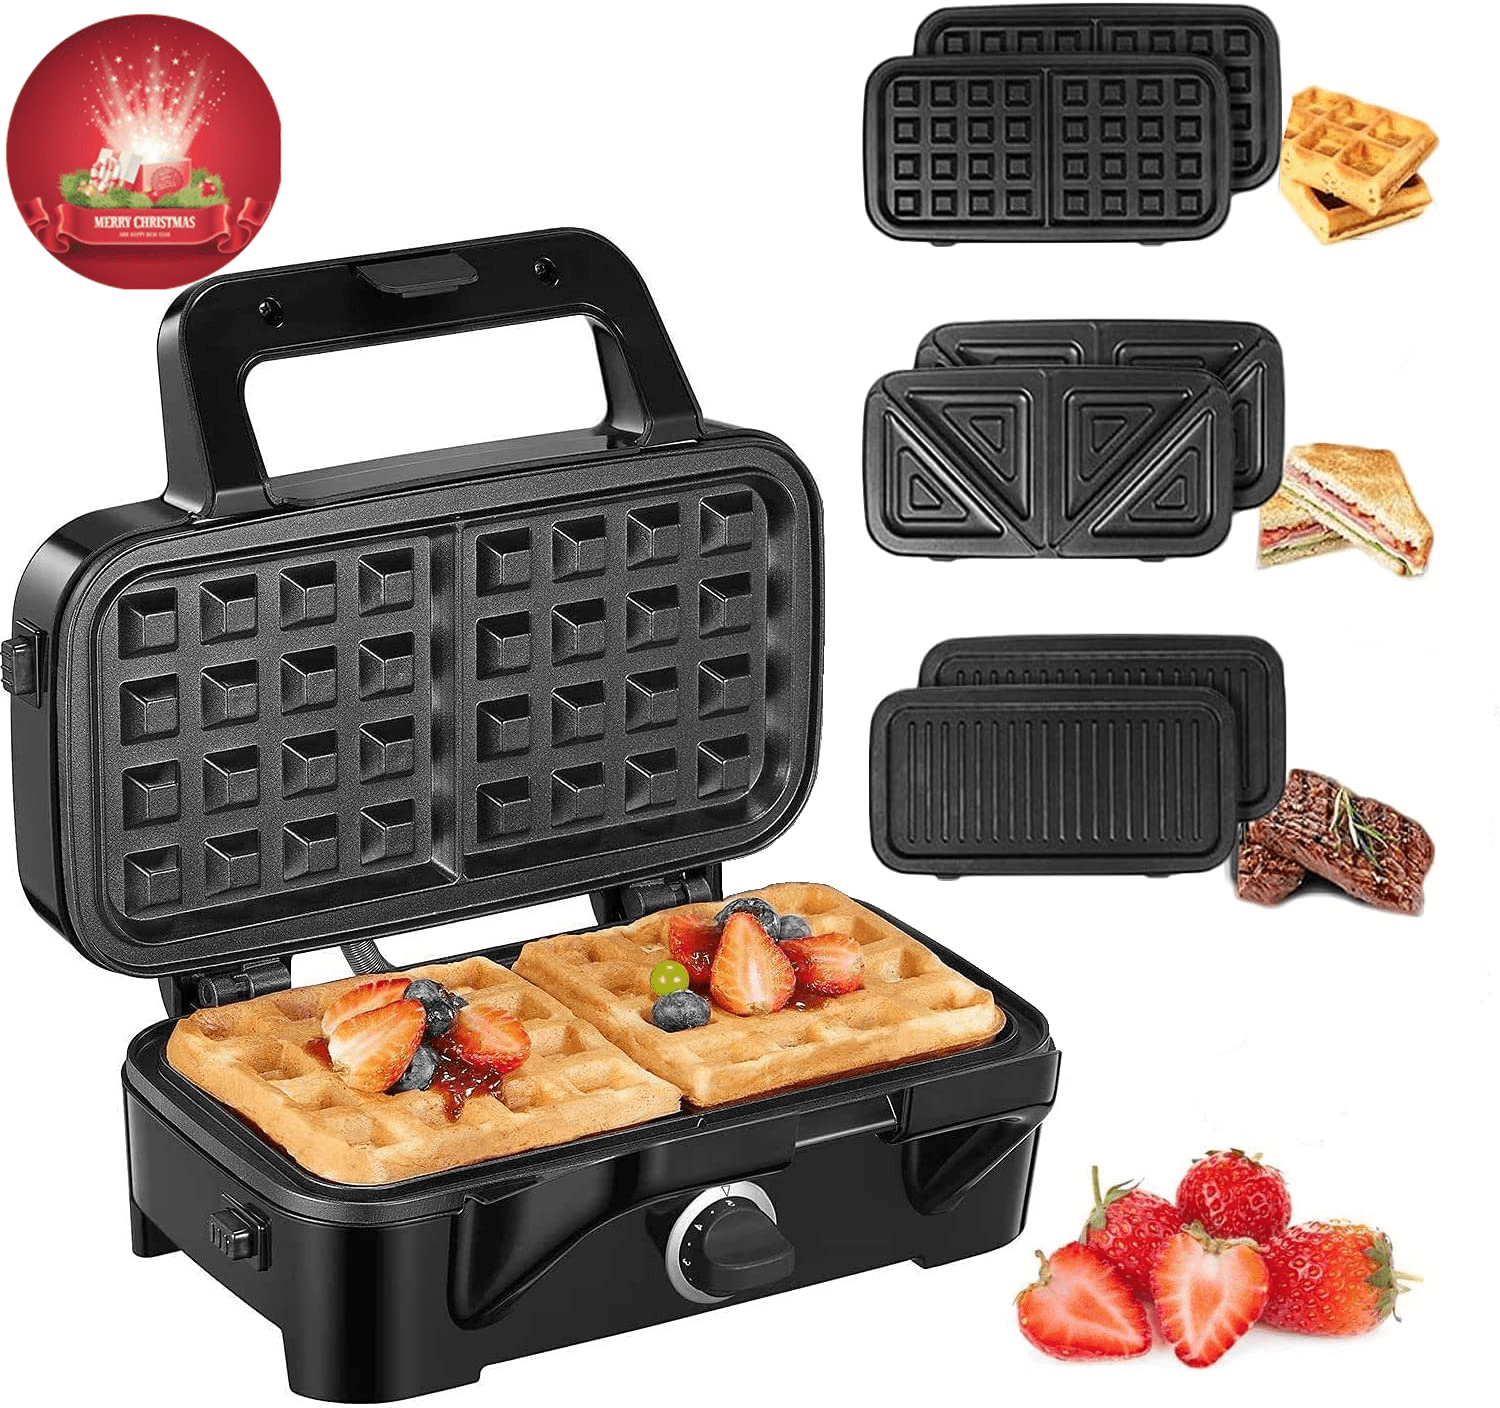 HOUSNAT 3 in 1 Sandwich Maker, Waffle Maker with Removable Plates, 1200W Panini Press with Interchangeable Non-Stick Plates, Indicator Lights, 5-gear